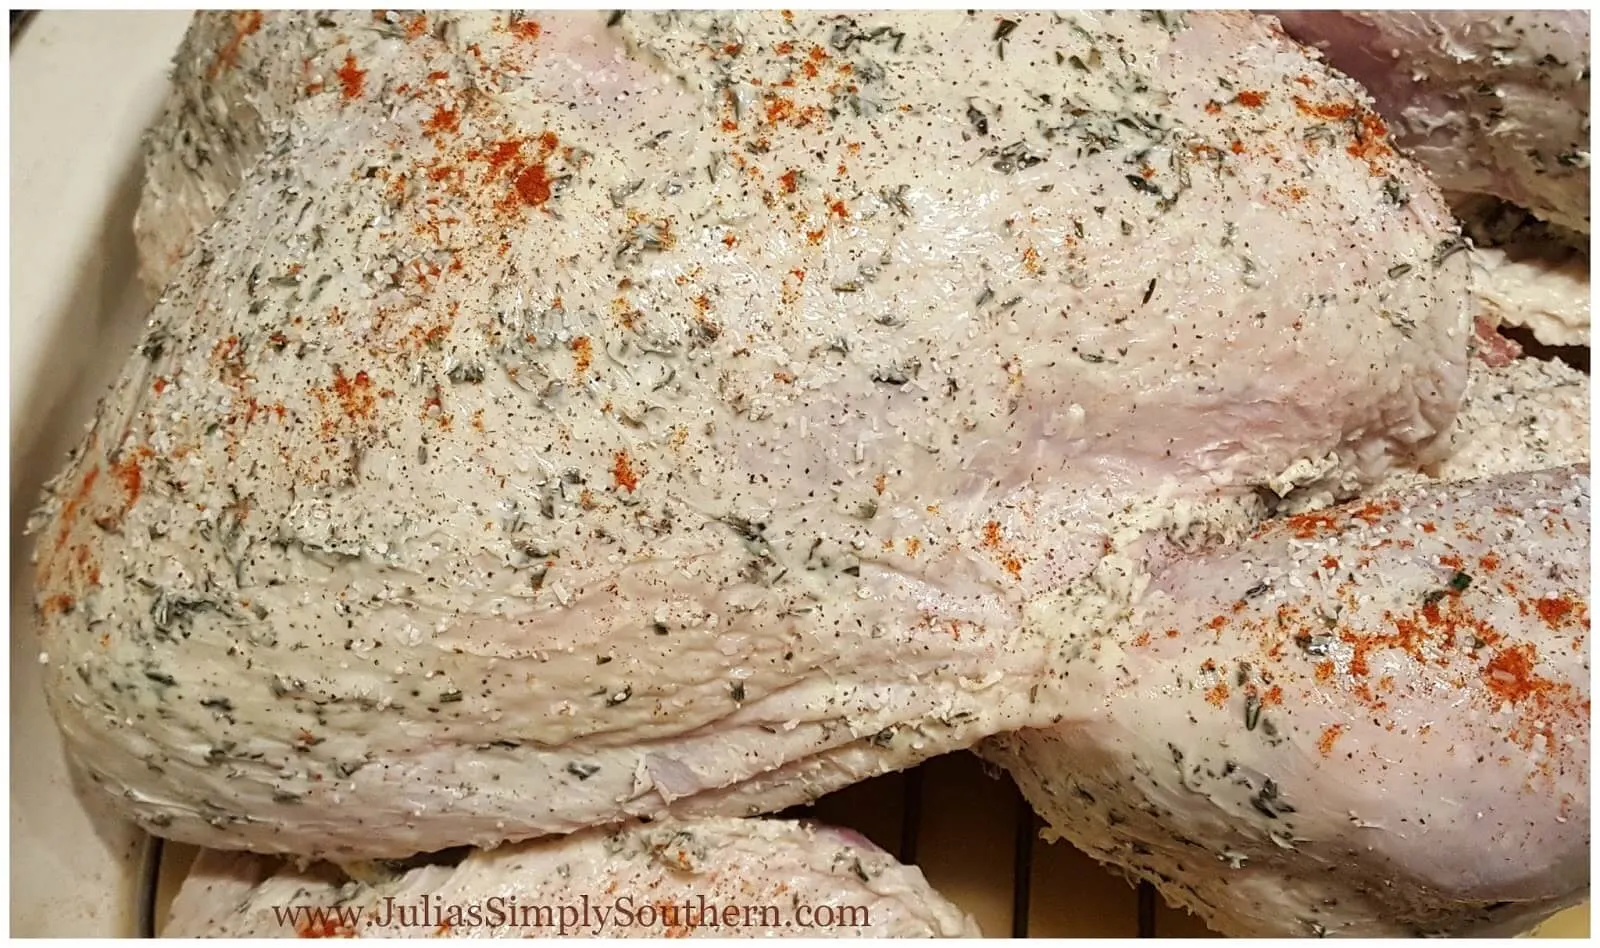 Herb Roasted Turkey Recipe - the buttered seasoned turkey is ready for the oven